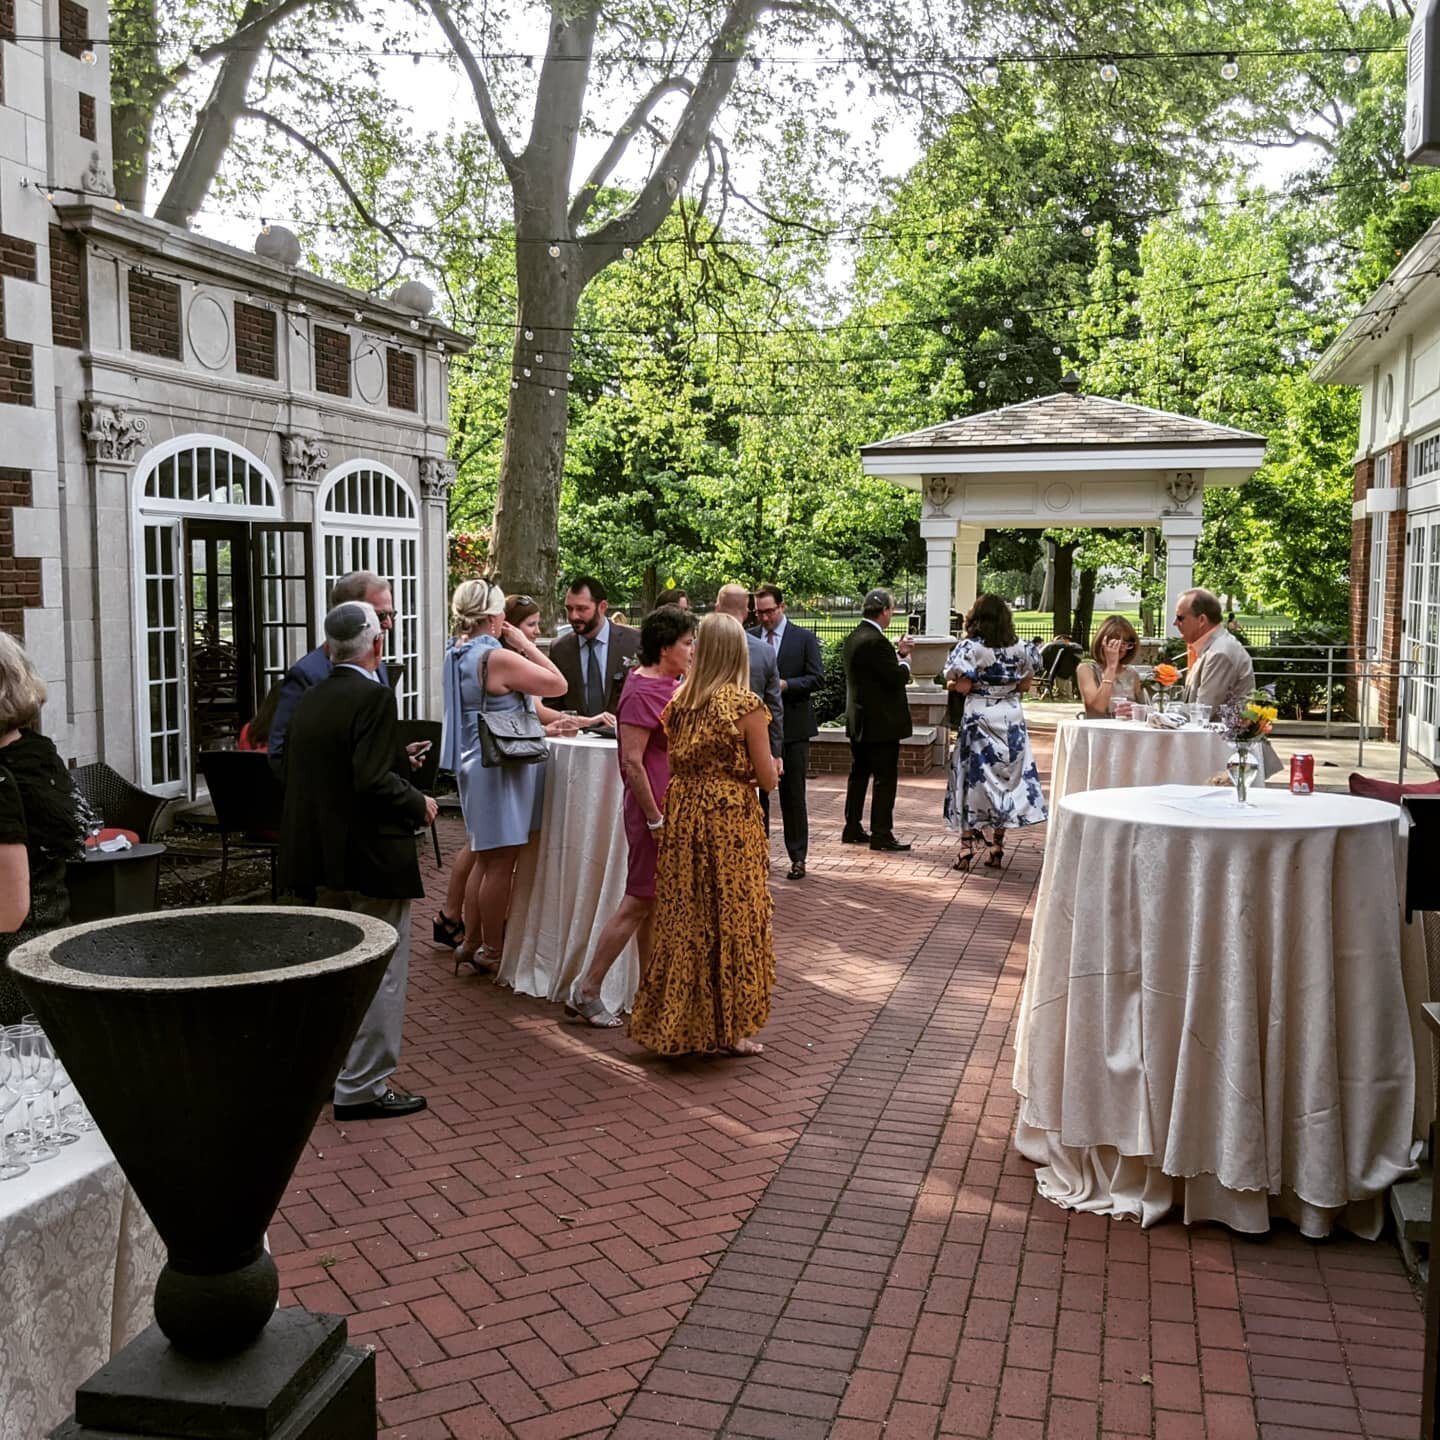 @zackbruellevents does an incredible job catering events of all kinds! Check out this beautiful wedding in the forever stunning Glidden House 👏👏
@gliddenhousehotel 
&bull;
&bull;
#zackbruell #zackbruellevents #universitycircle #cleveland #clefood #